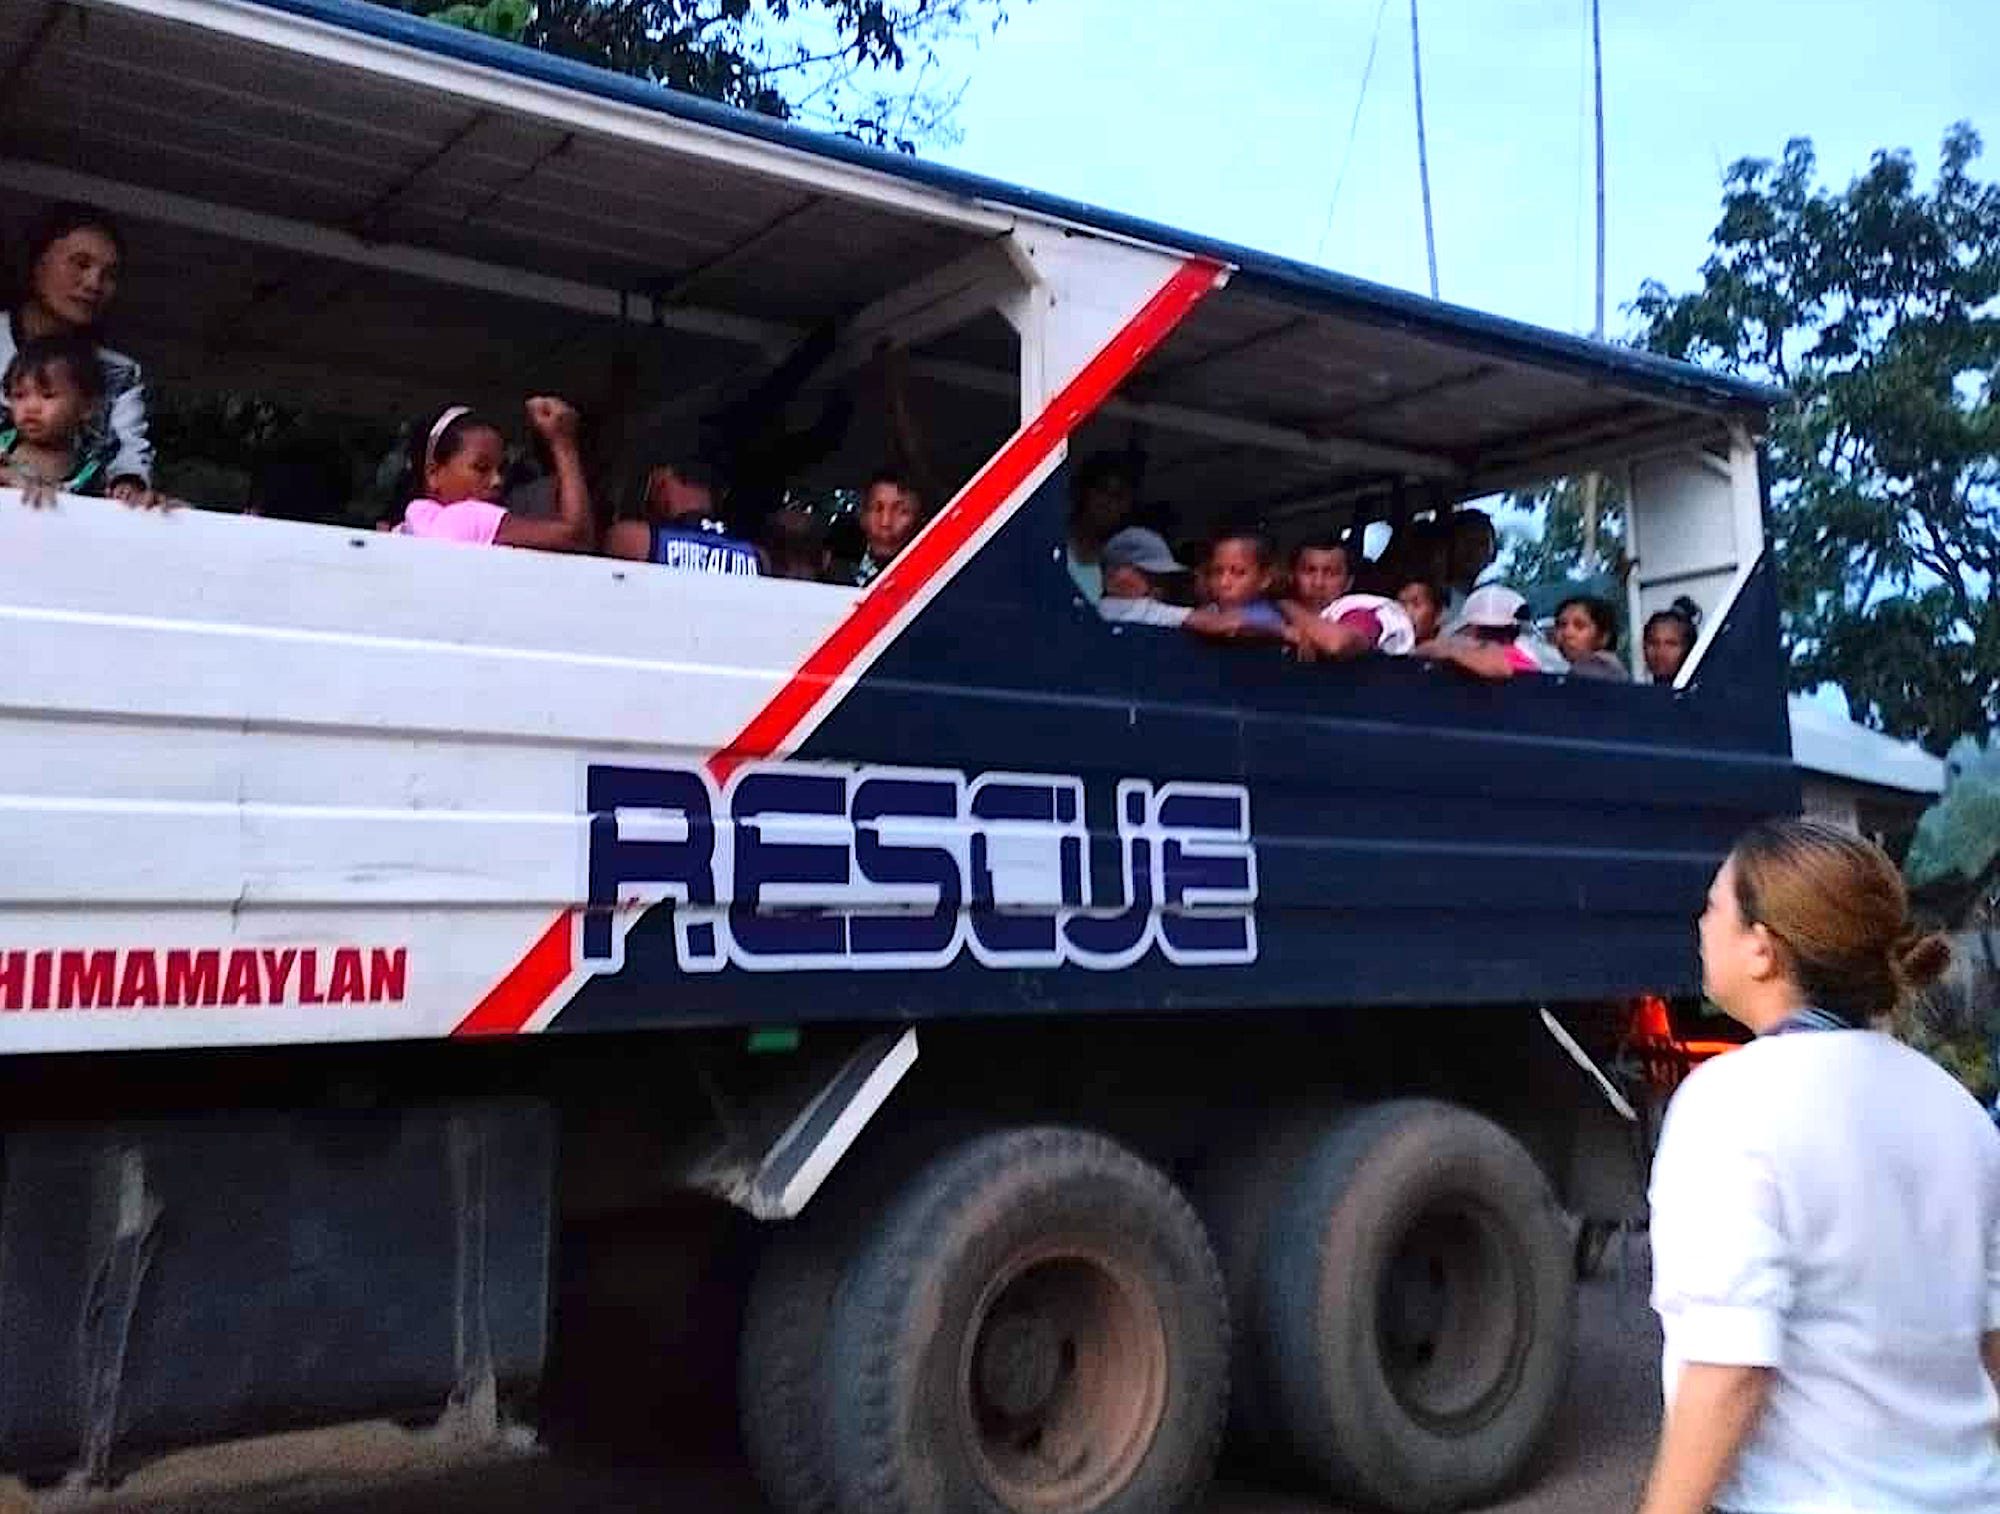 Over a thousand Himamaylan evacuees await greenlight to return home